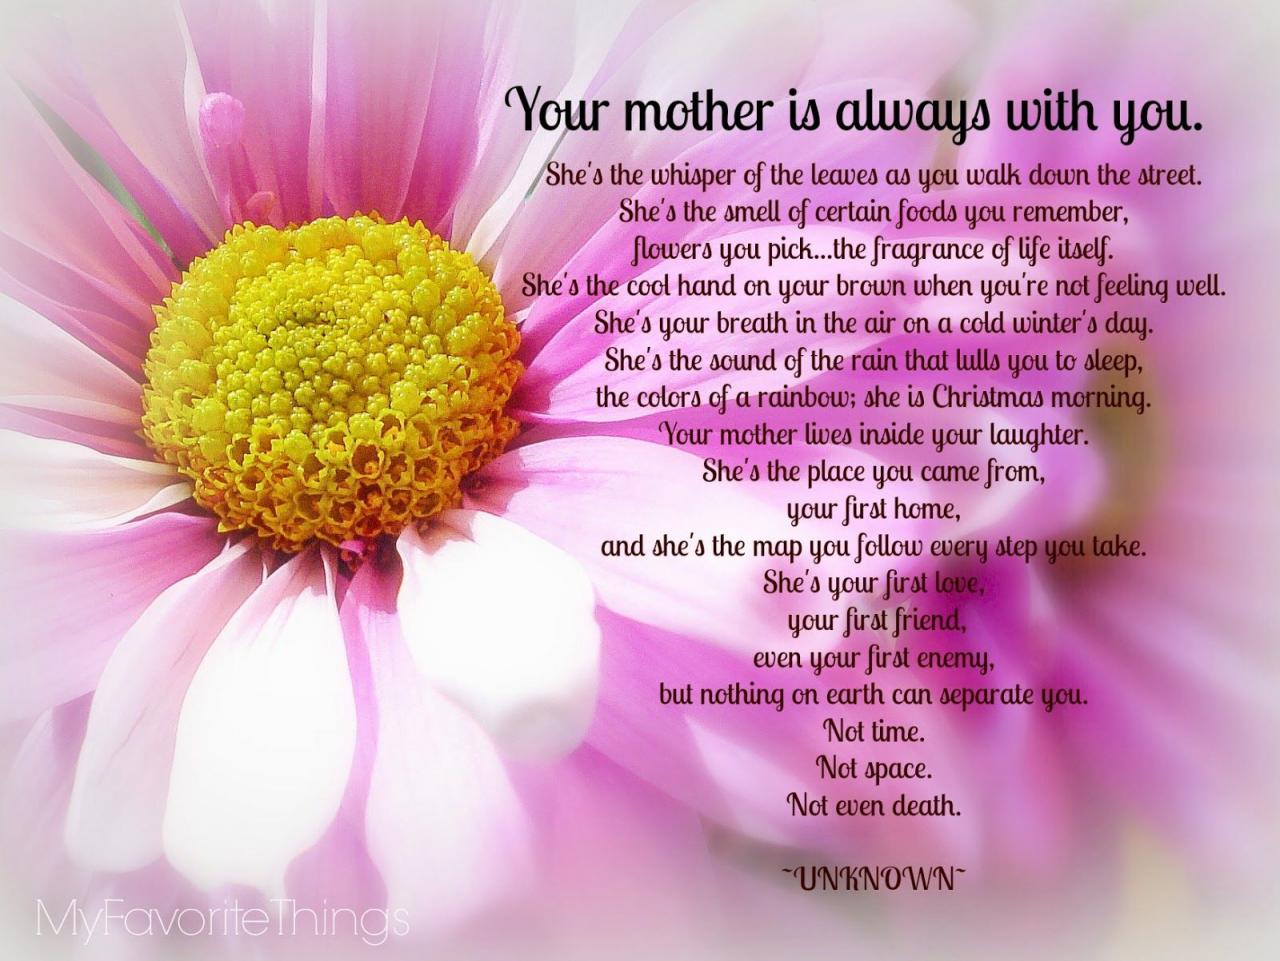 Happy heavenly mother's day